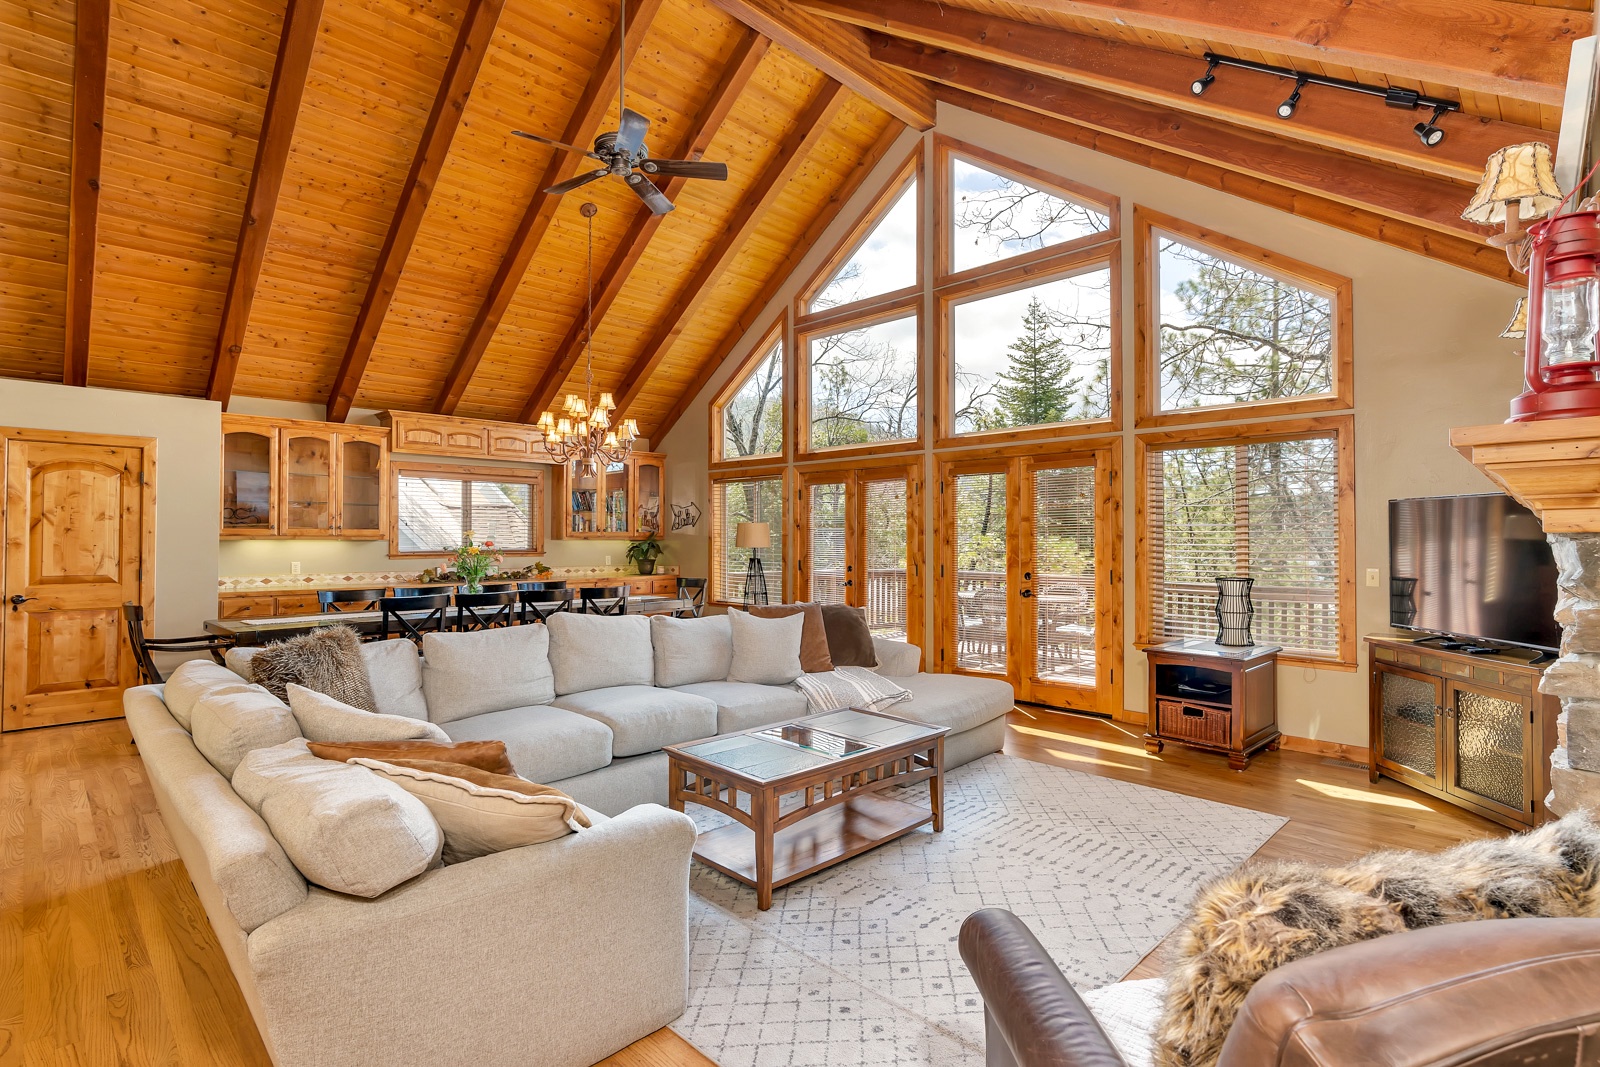 Enjoy the soaring ceilings & breezy, open layout of the main great room